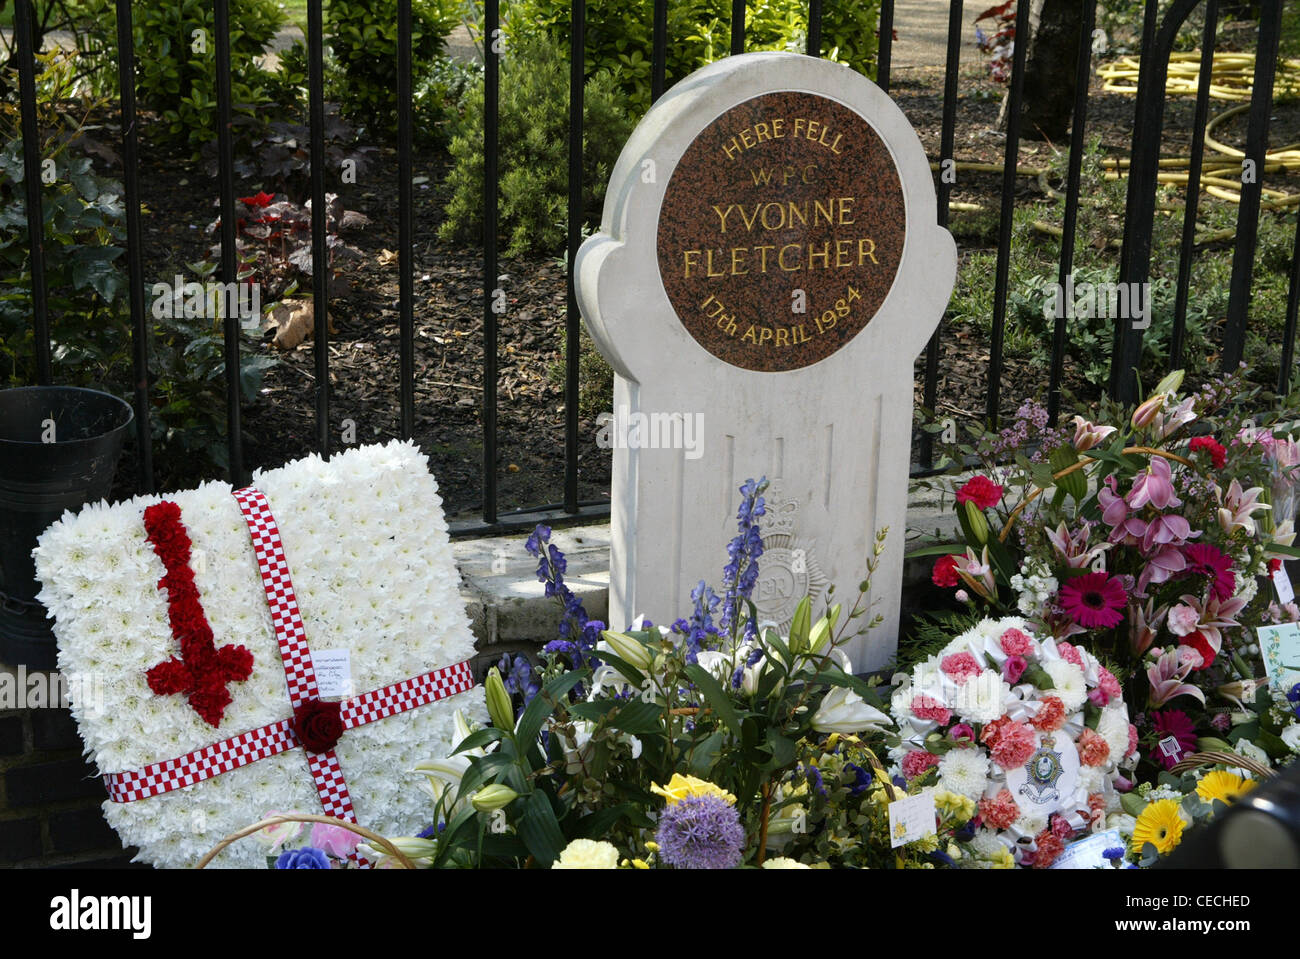 Memorial stone to PC Yvonne Fletcher, Policewoman killed during protest outside Libyan Embassy in London in 1984 Stock Photo